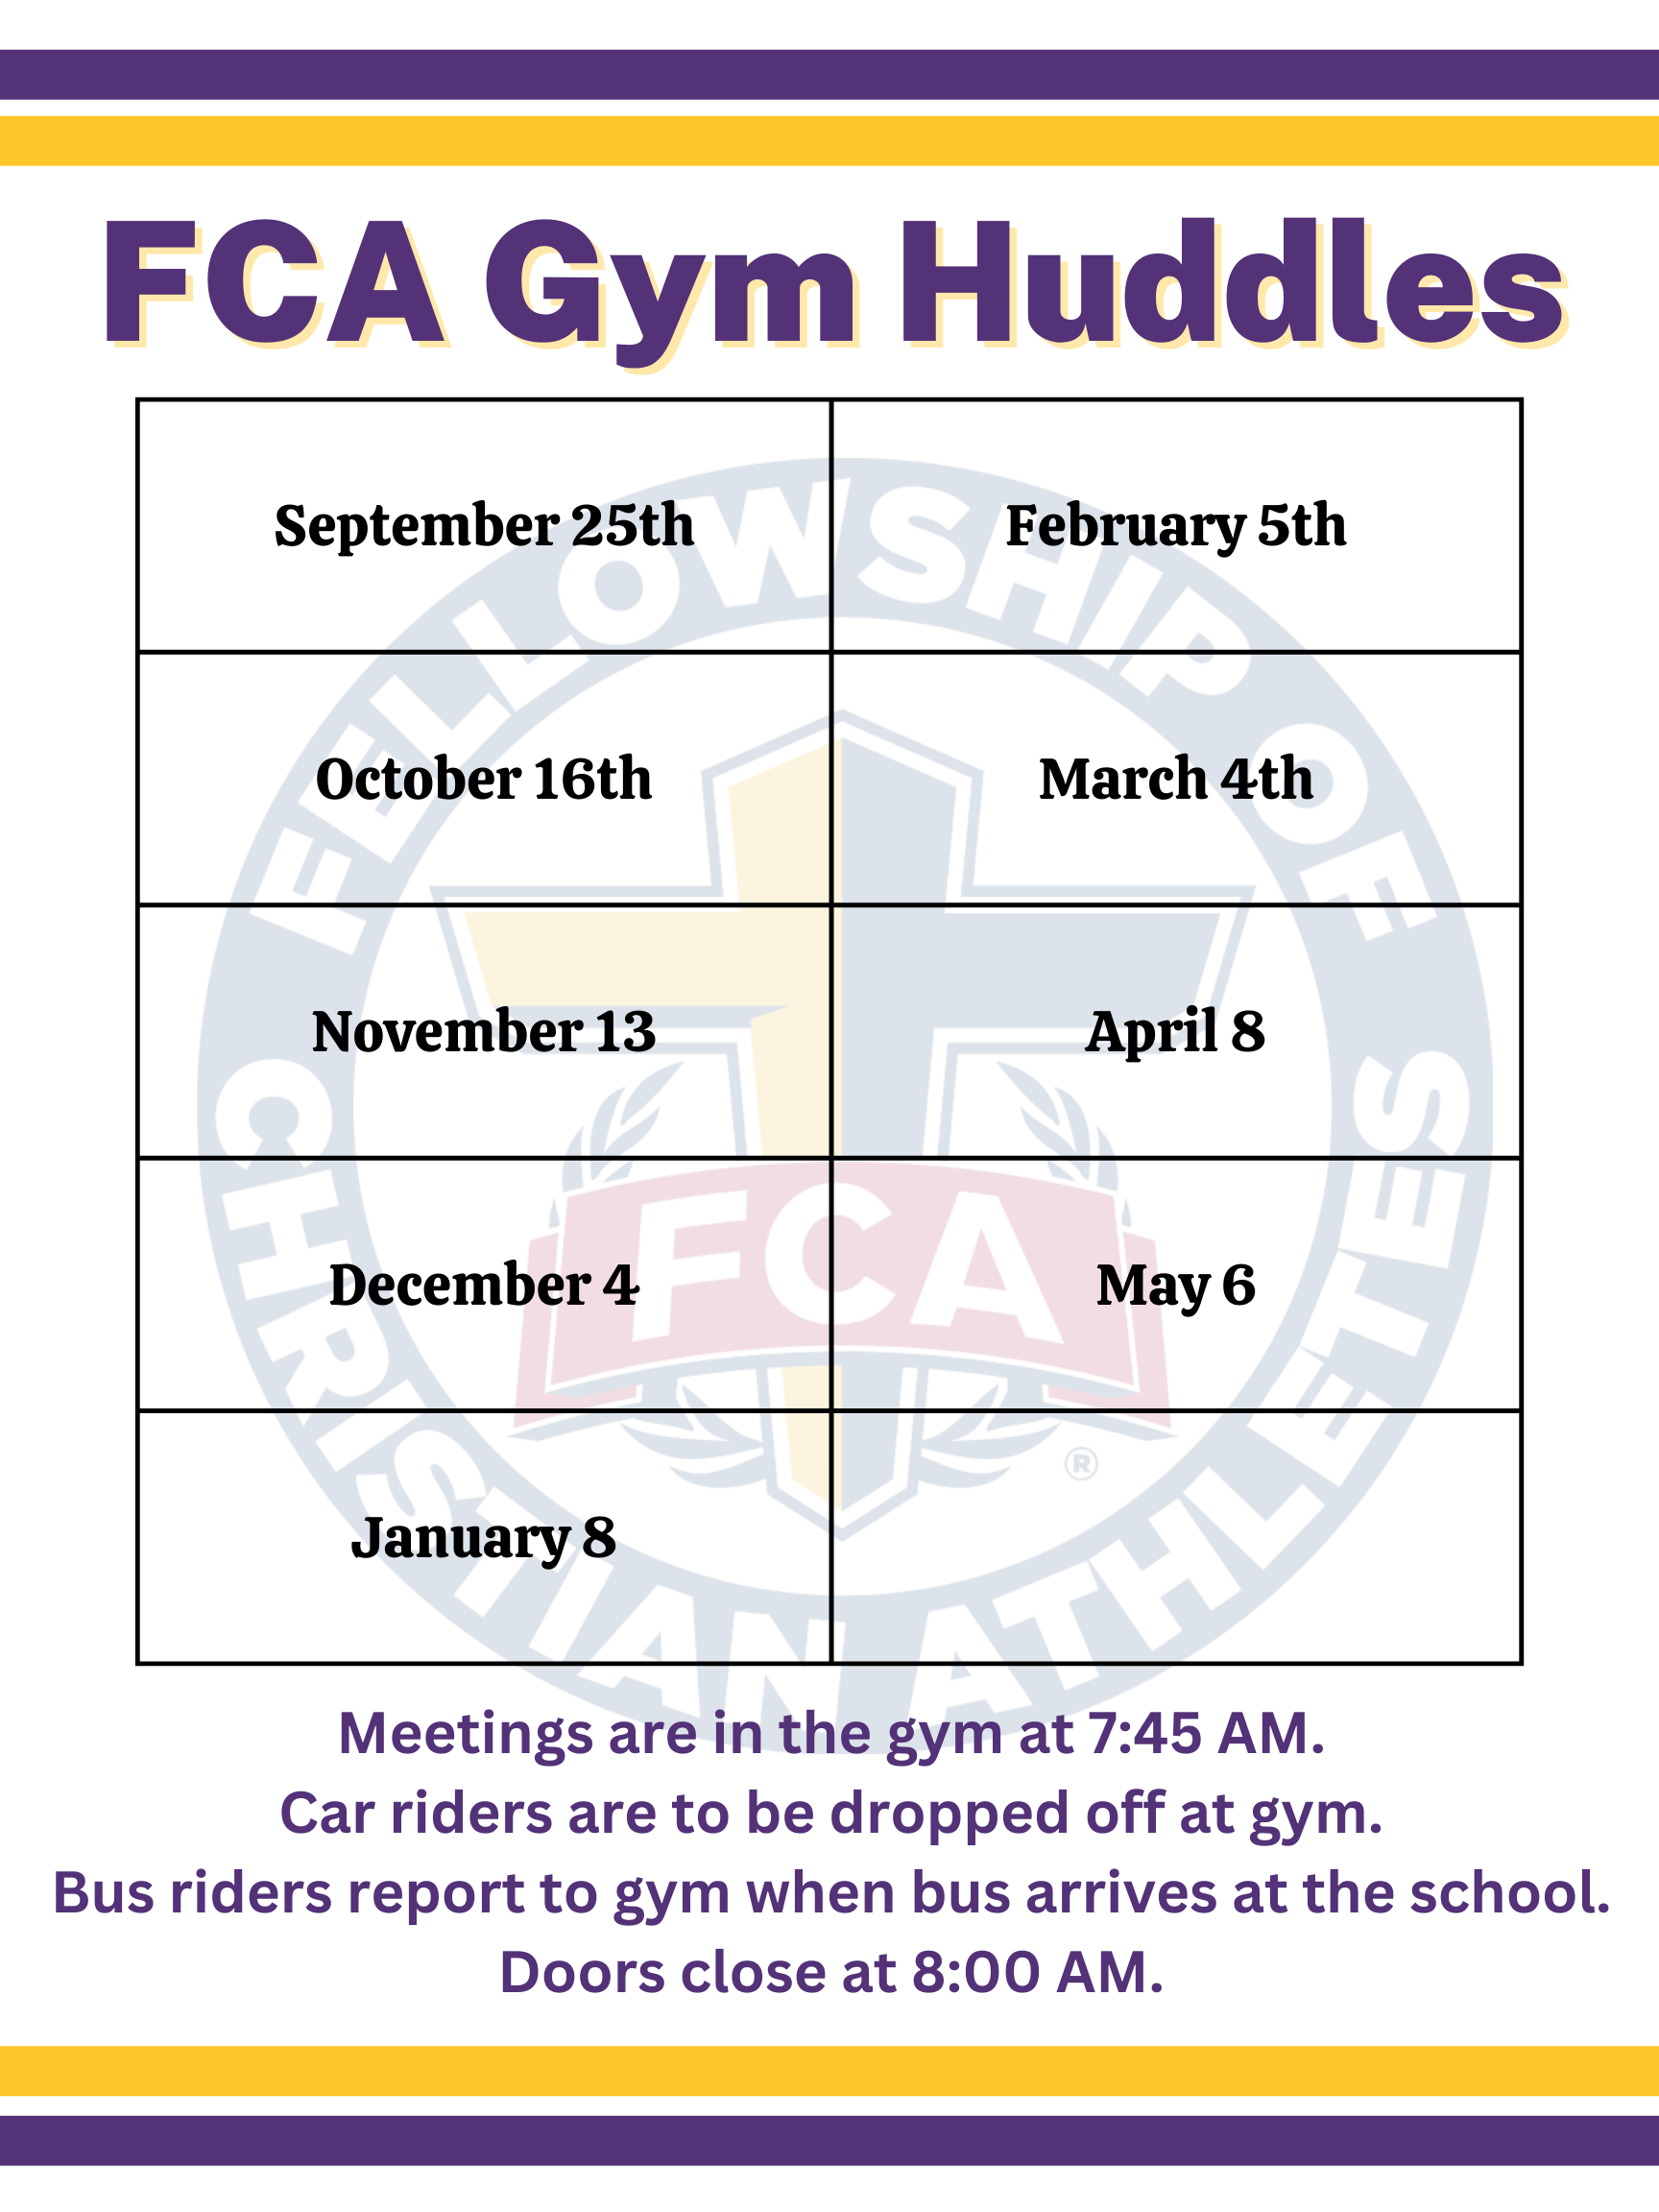 FCA Gym Huddles; September 25th	February 5th October 16th	March 4th November 13	April 8 December 4	May 6 January 8 Meetings are in the gym at 7:45 AM. Car riders are to be dropped off at gym. Bus riders report to gym when bus arrives at the school. Doors close at 8:00 AM.	